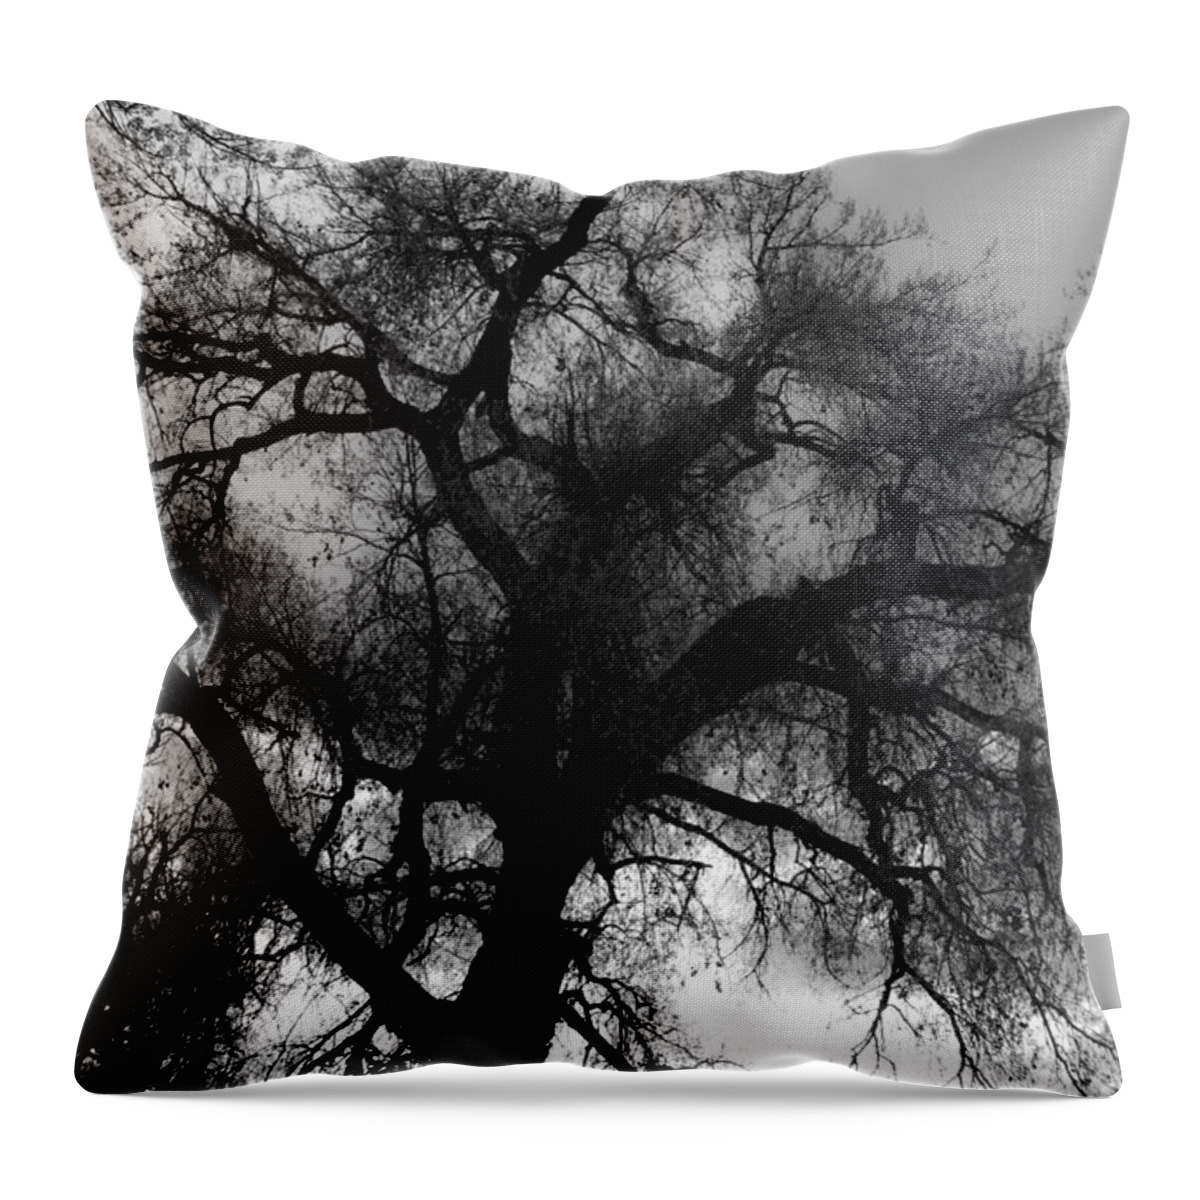 Silhouette Throw Pillow featuring the photograph Silhouette by James BO Insogna